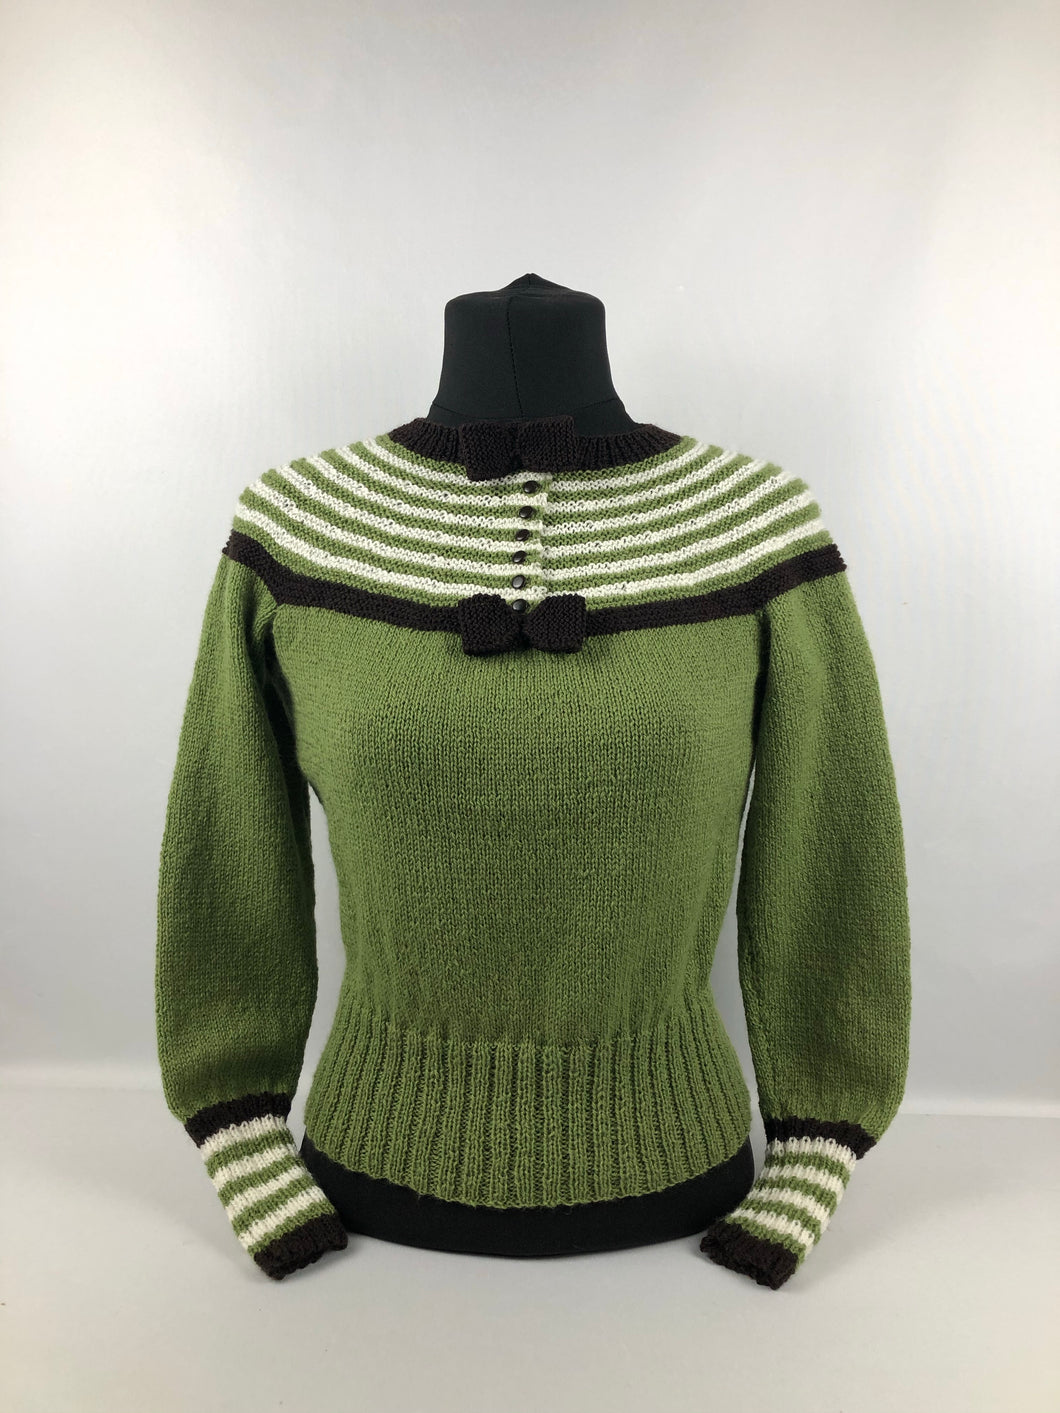 Reproduction 1930s Hand Knitted Jumper in Soft Green with Brown and Cream Stripes B 35